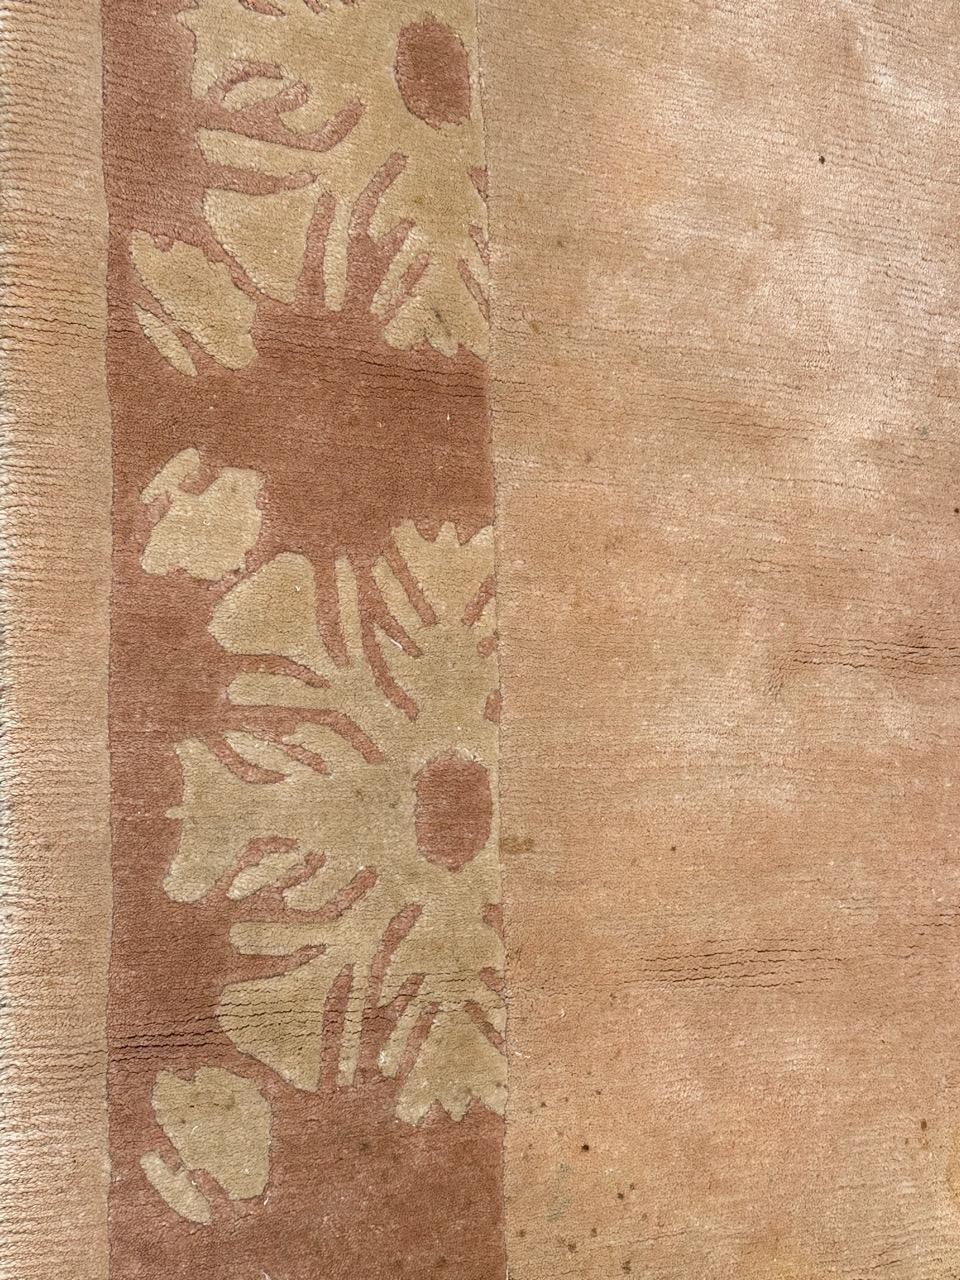 Pretty vintage modern design Nepalese rug with a simple design with a cream open field with design and a light border with stylized flowers on a light brown, around the field. Entirely hand knotted with wool on cotton foundation.

✨✨✨
